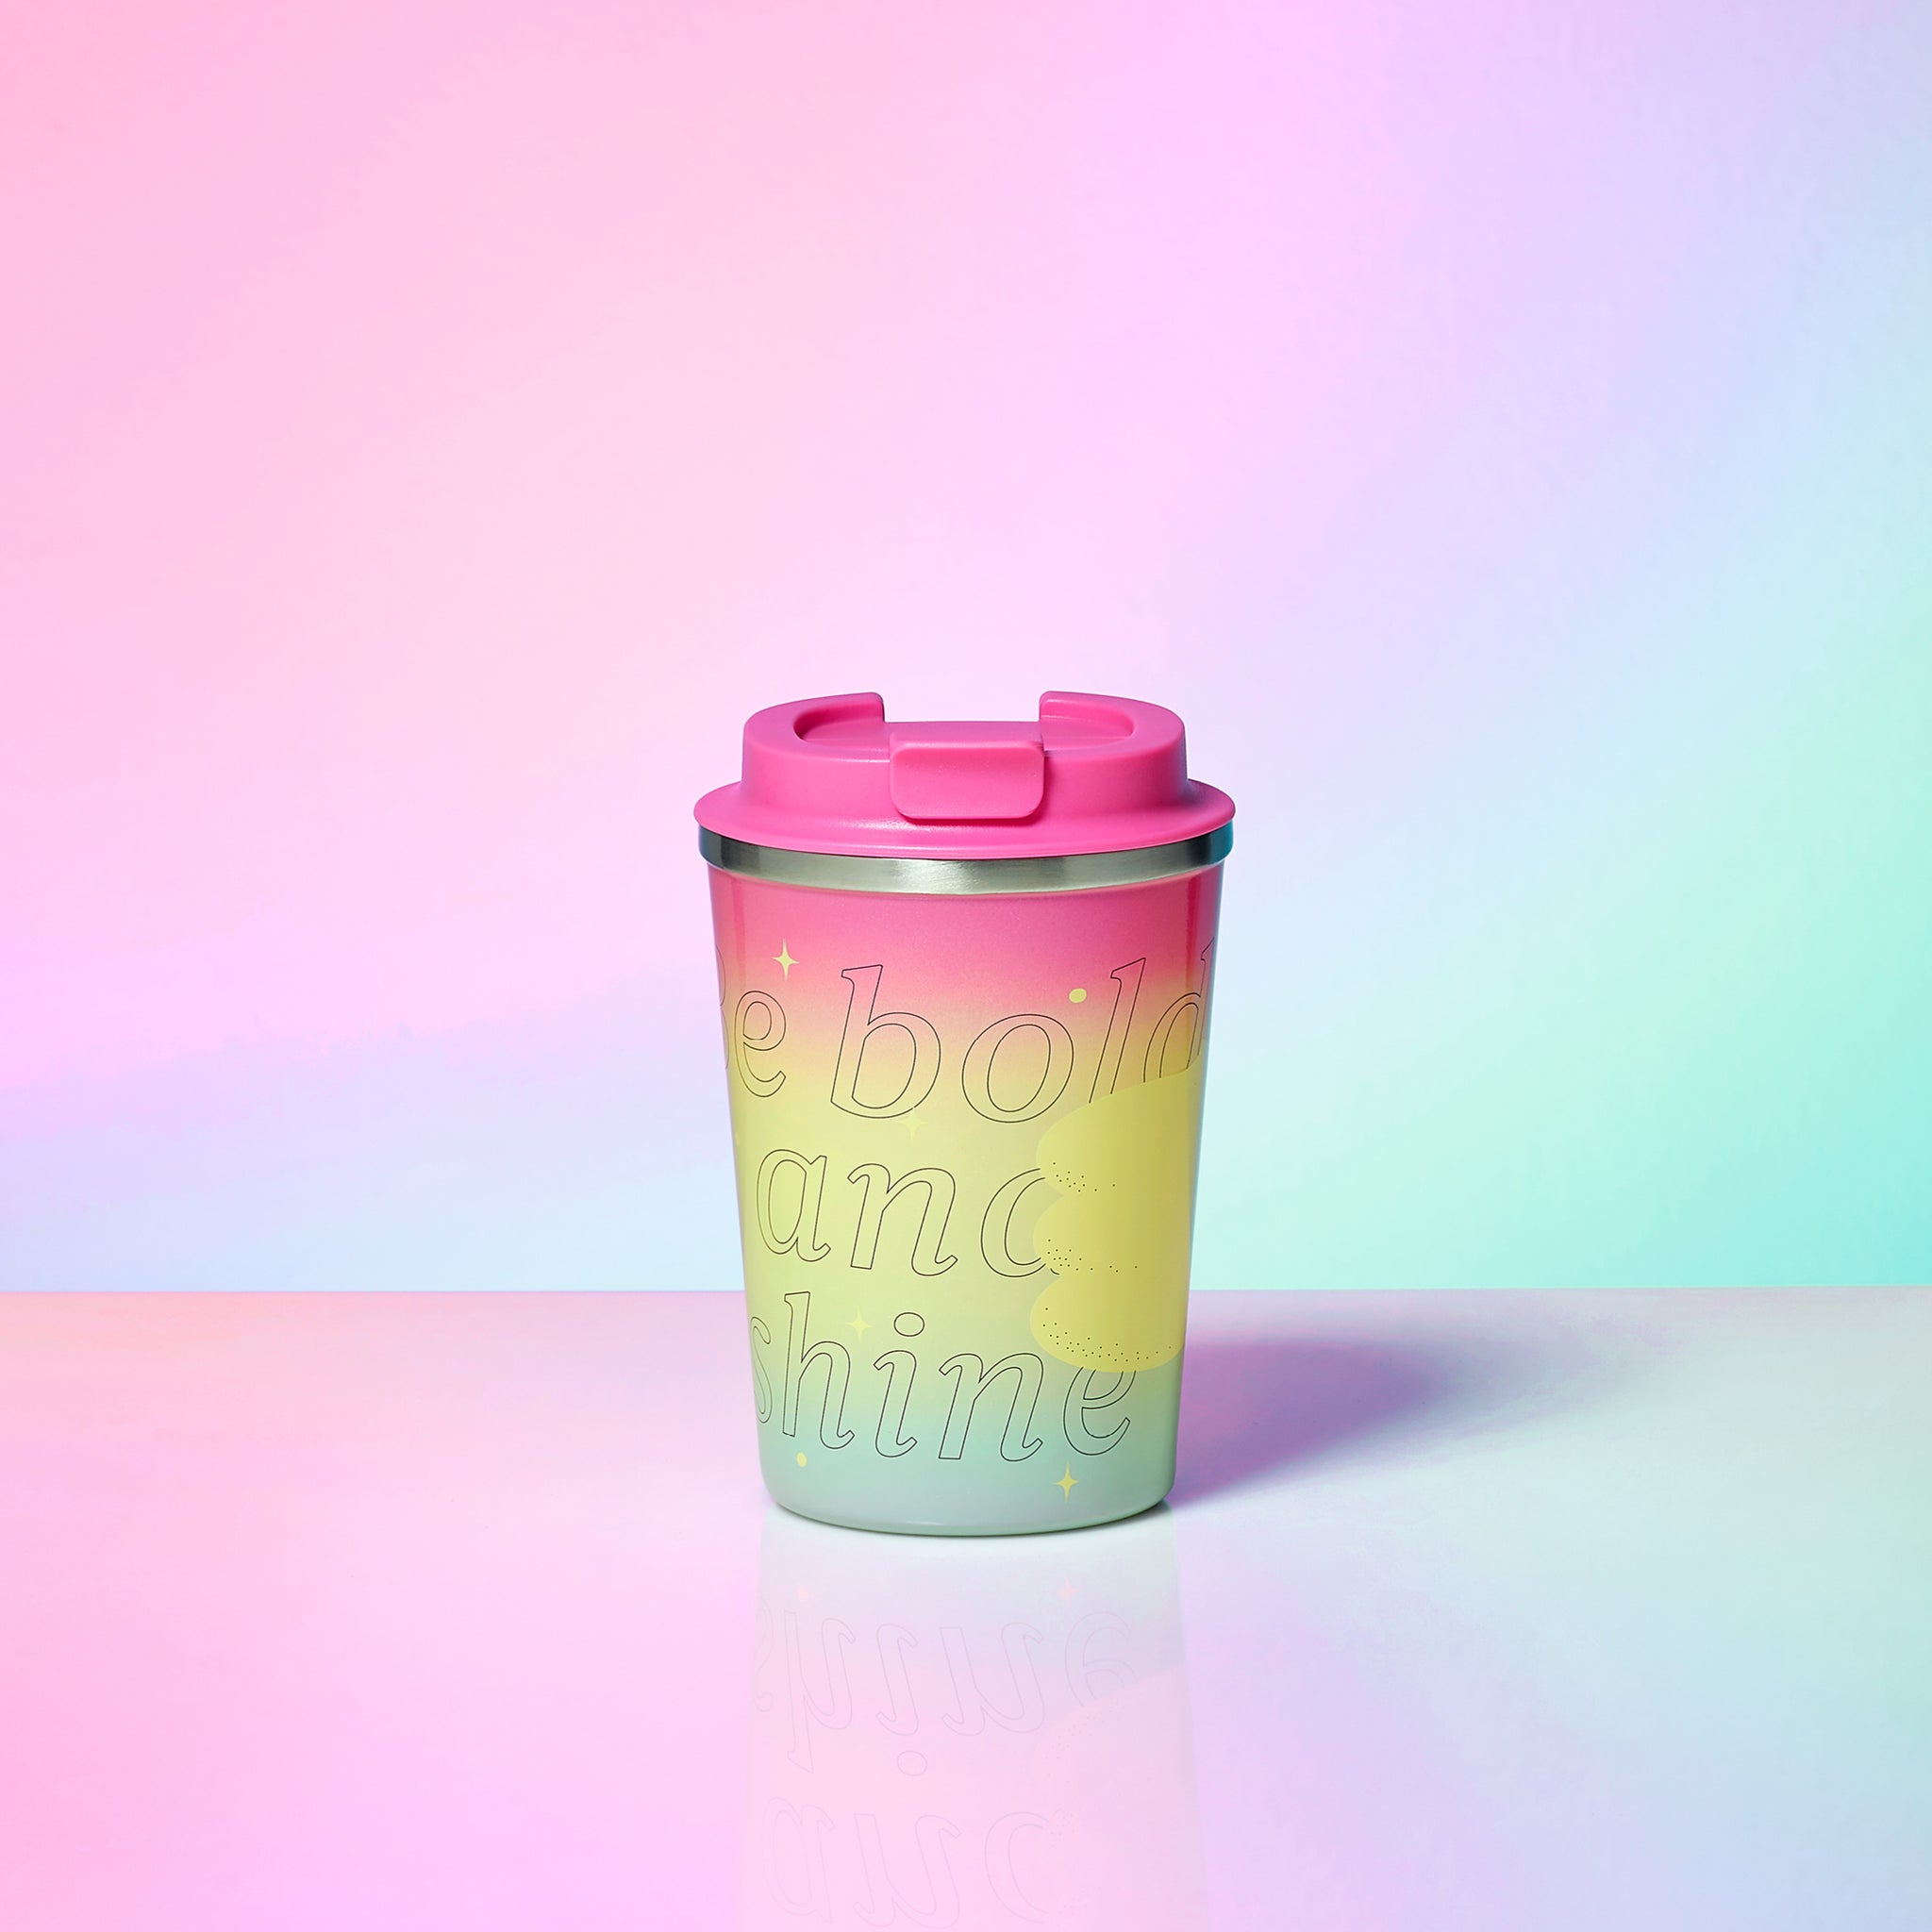 12OZ BE BOLD AND SHINE GRADIENT RAINBOW SS TUMBLER 12OZ BE BOLD AND SHINE 彩虹色不鏽鋼隨行杯